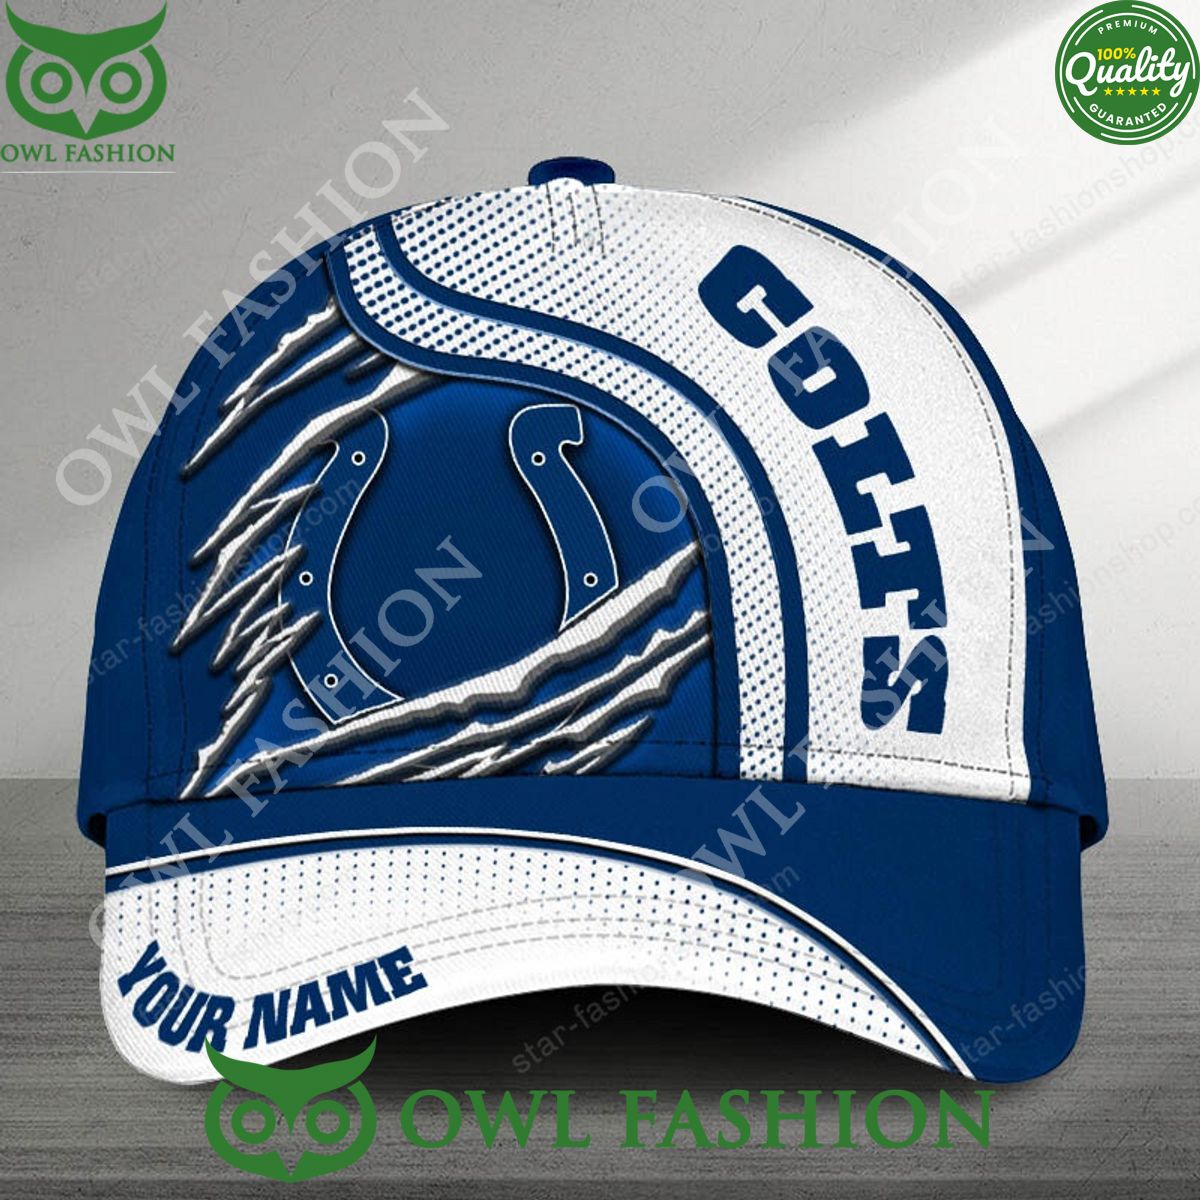 Indianapolis Colts Customized NFL Printed Cap